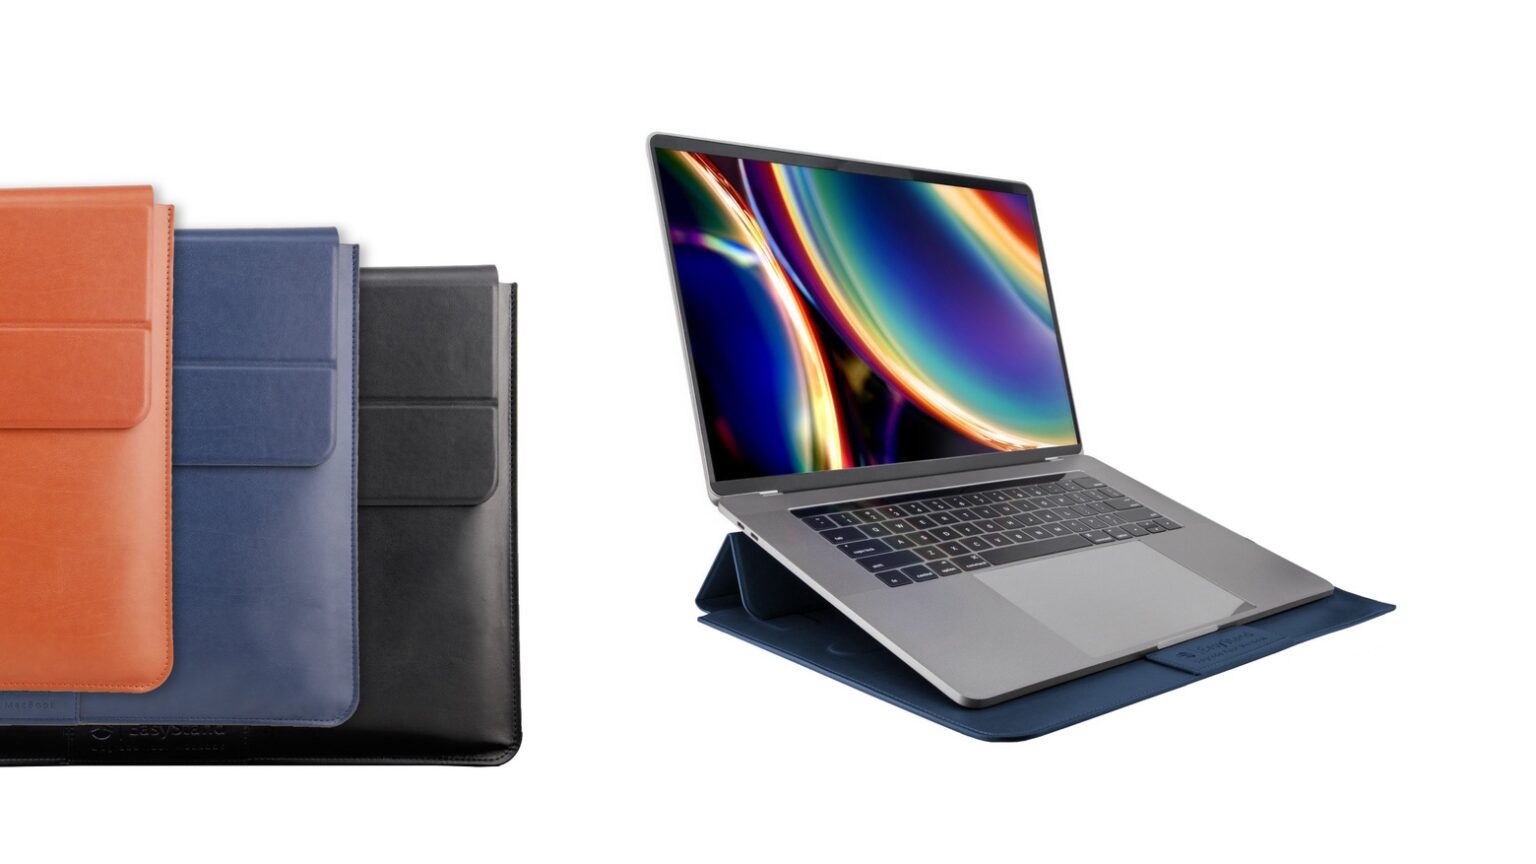 Protect your precious MacBook with these slim cases from SwitchEasy